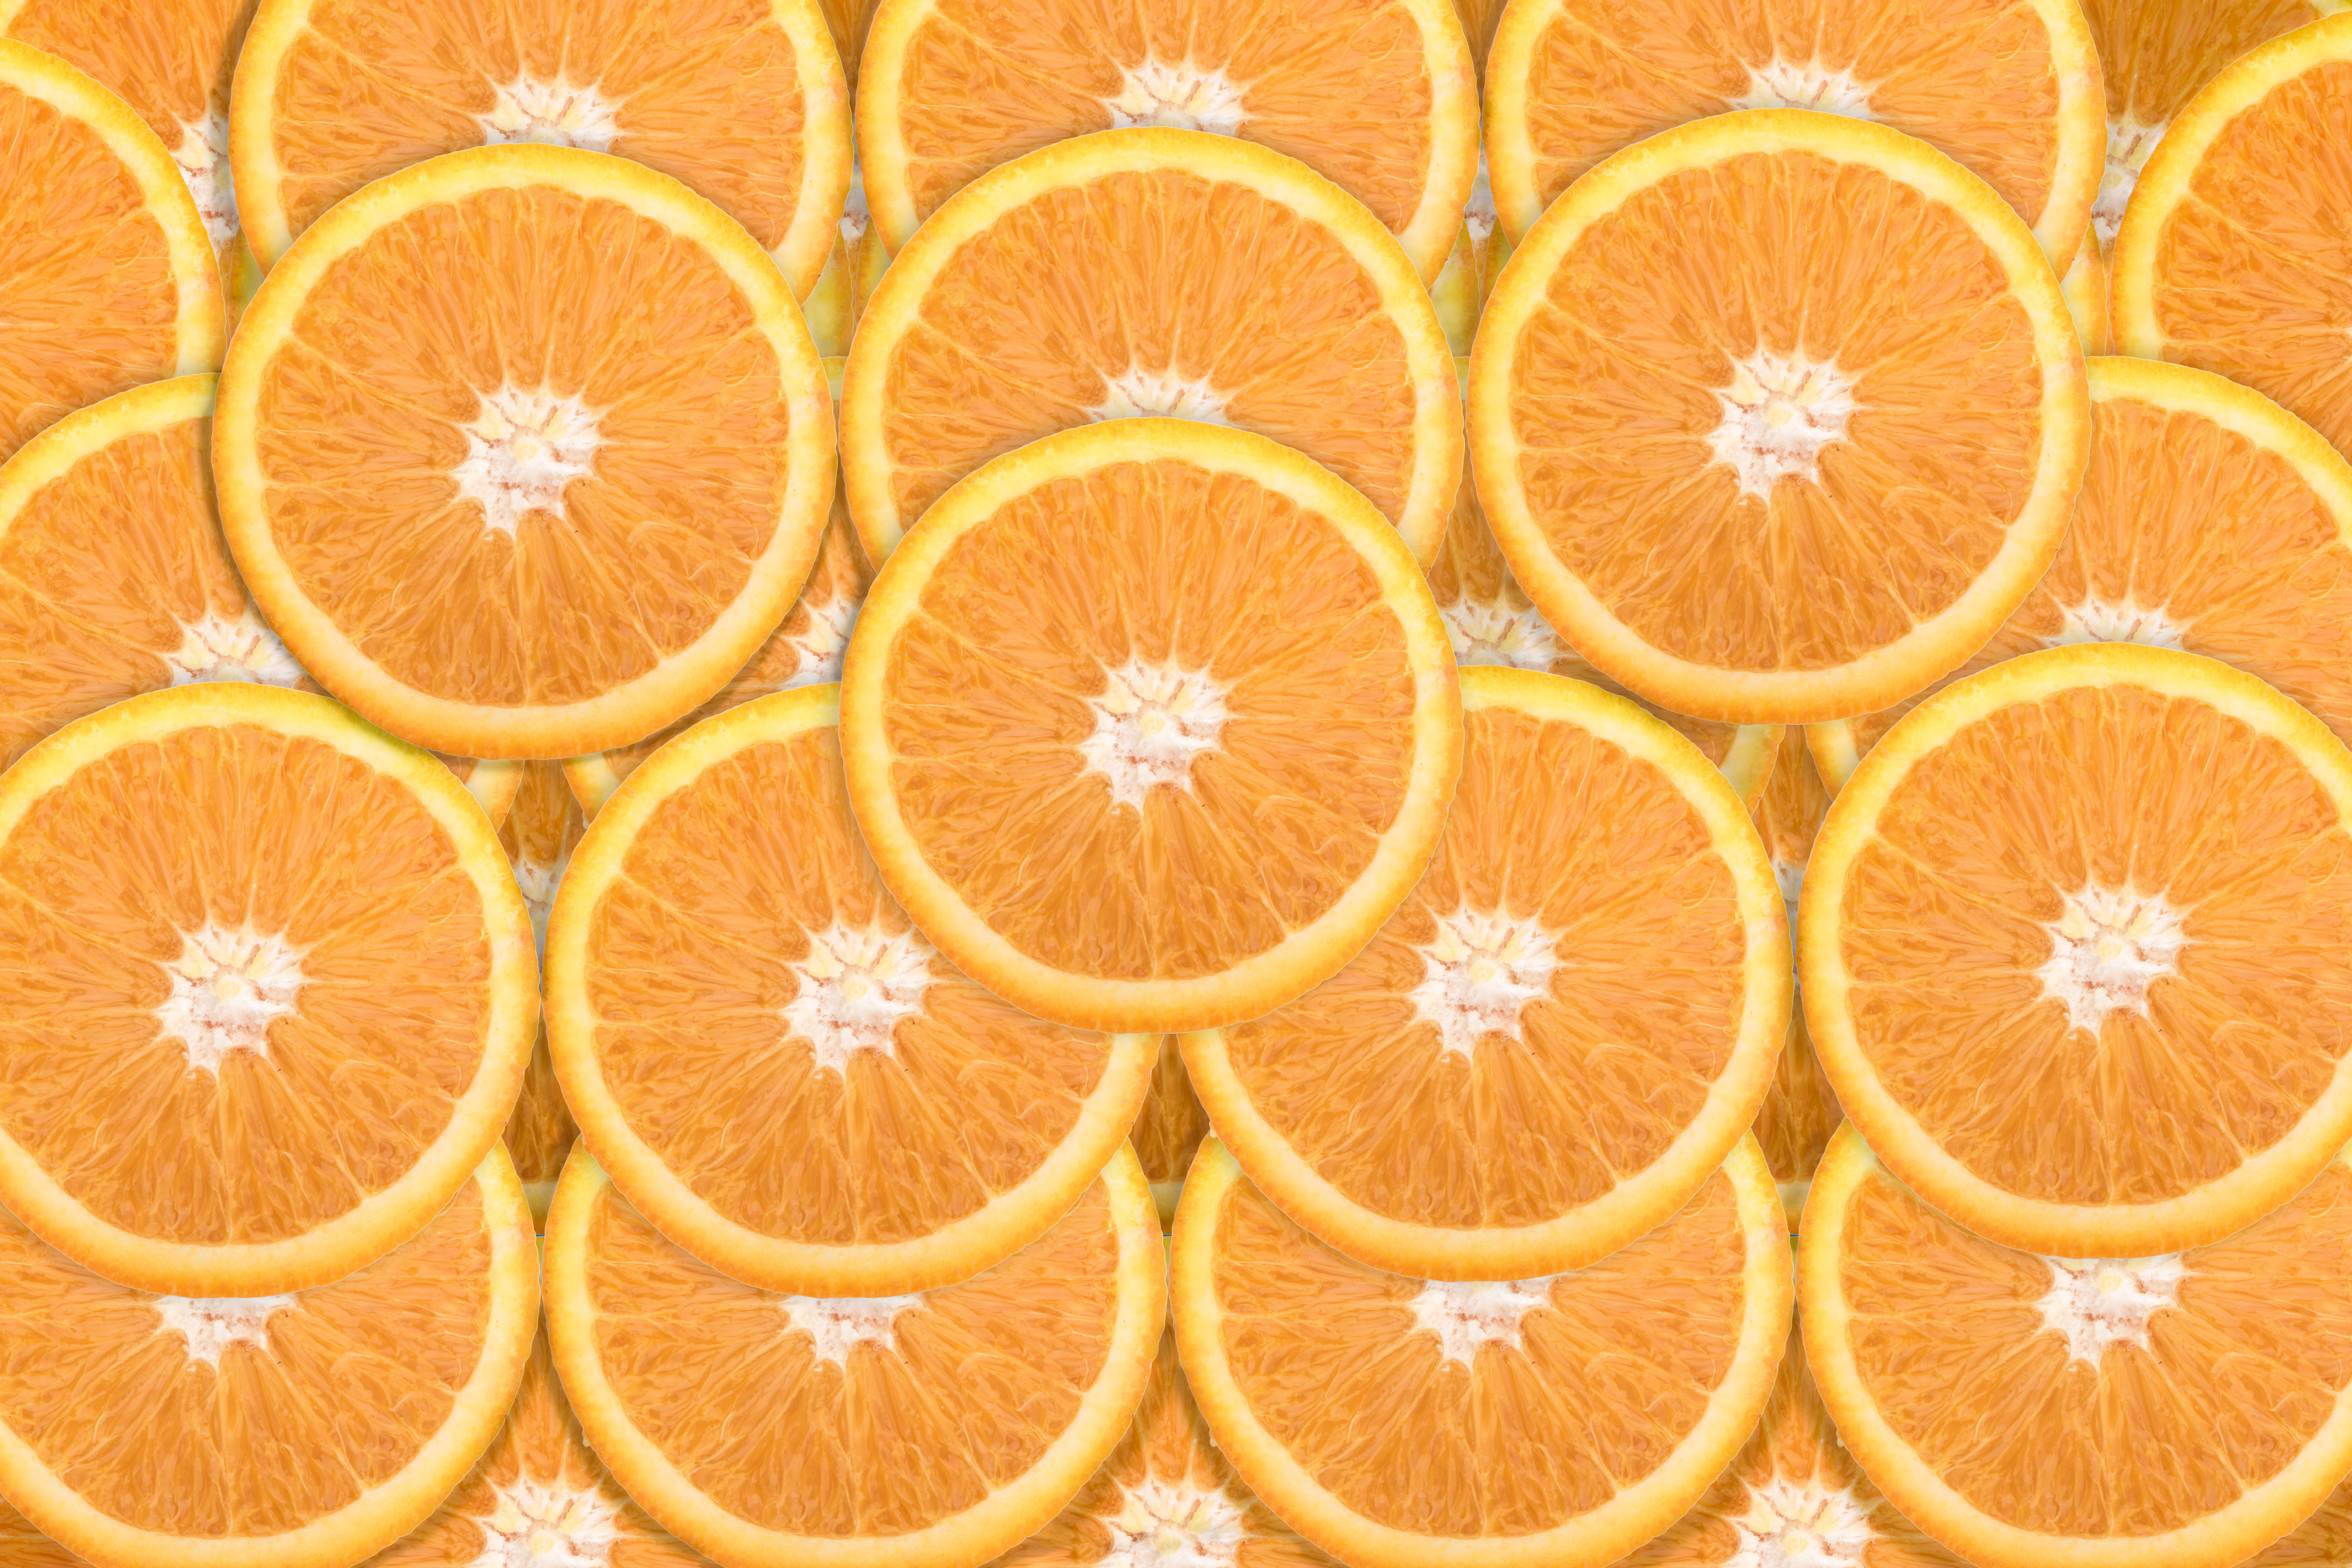 How to Juice Oranges With Skin | LIVESTRONG.COM